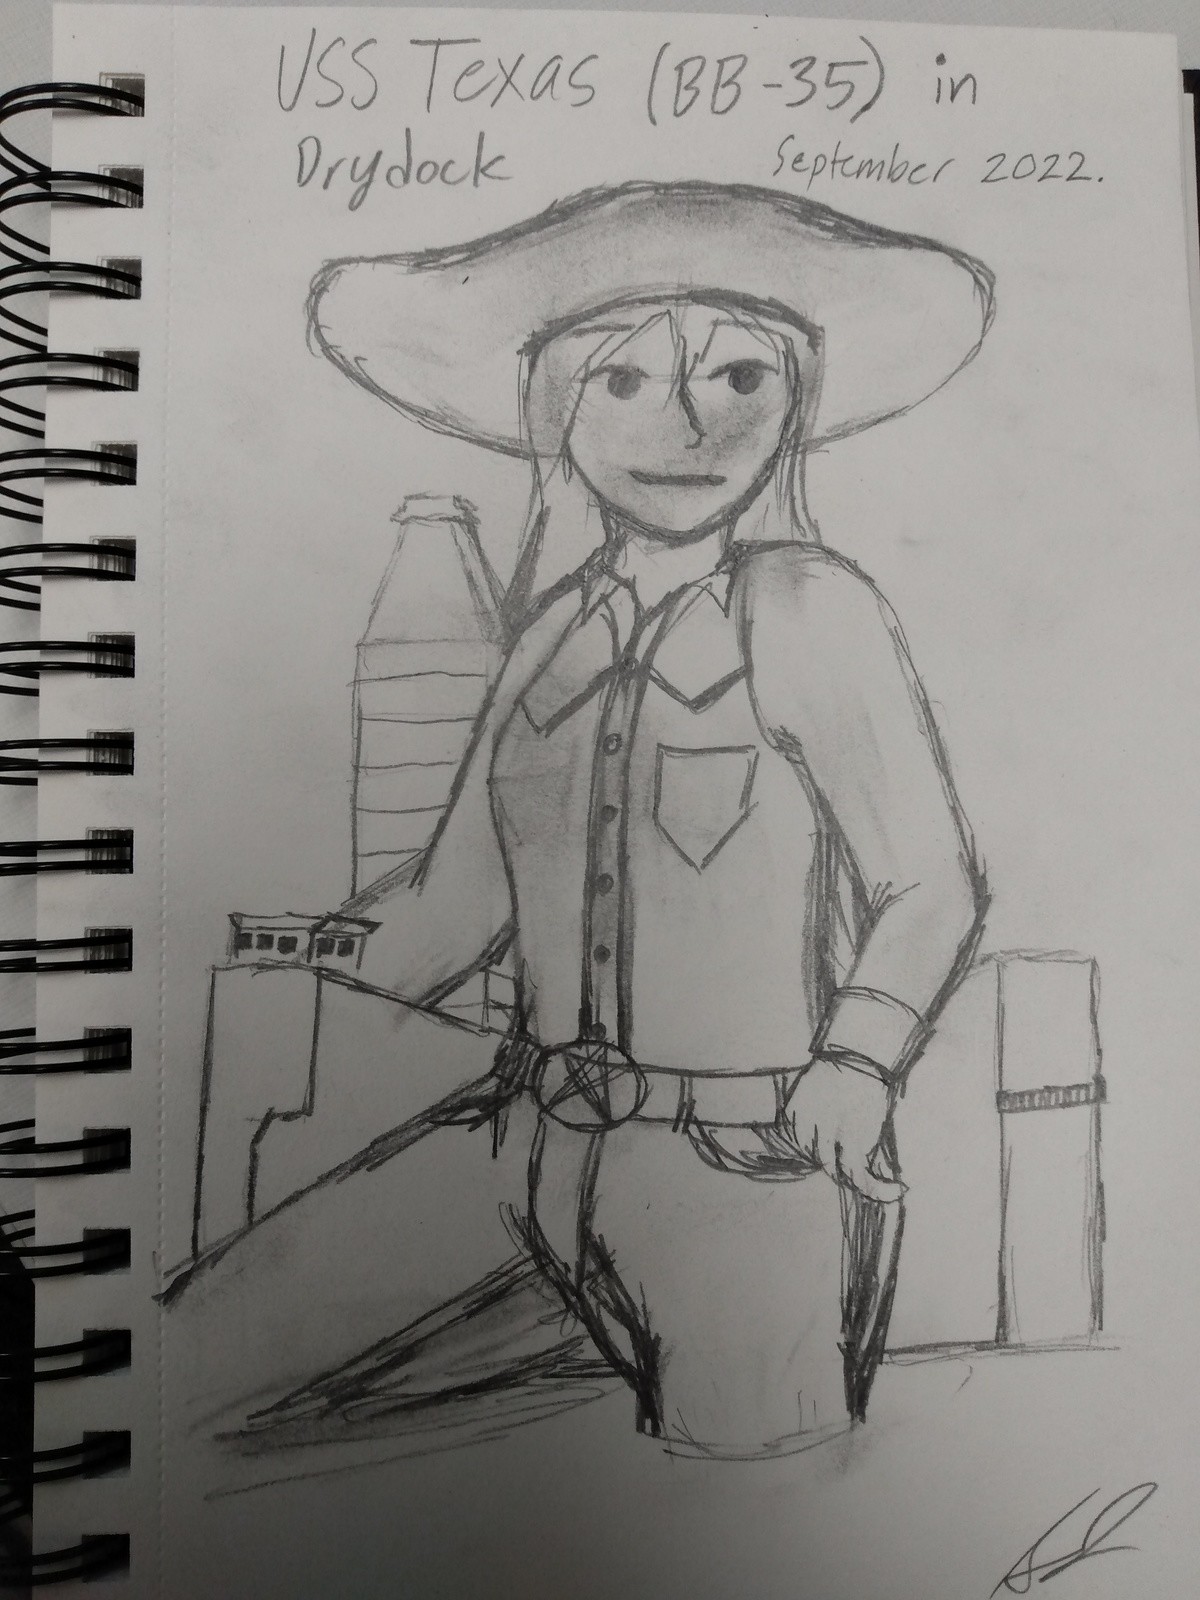 hesitant Starling. Been sitting on this idea for several weeks. Cowboy hats are hard. join list: magikarpsplash (161 subs)Mention History.. Oh the drydock thing.